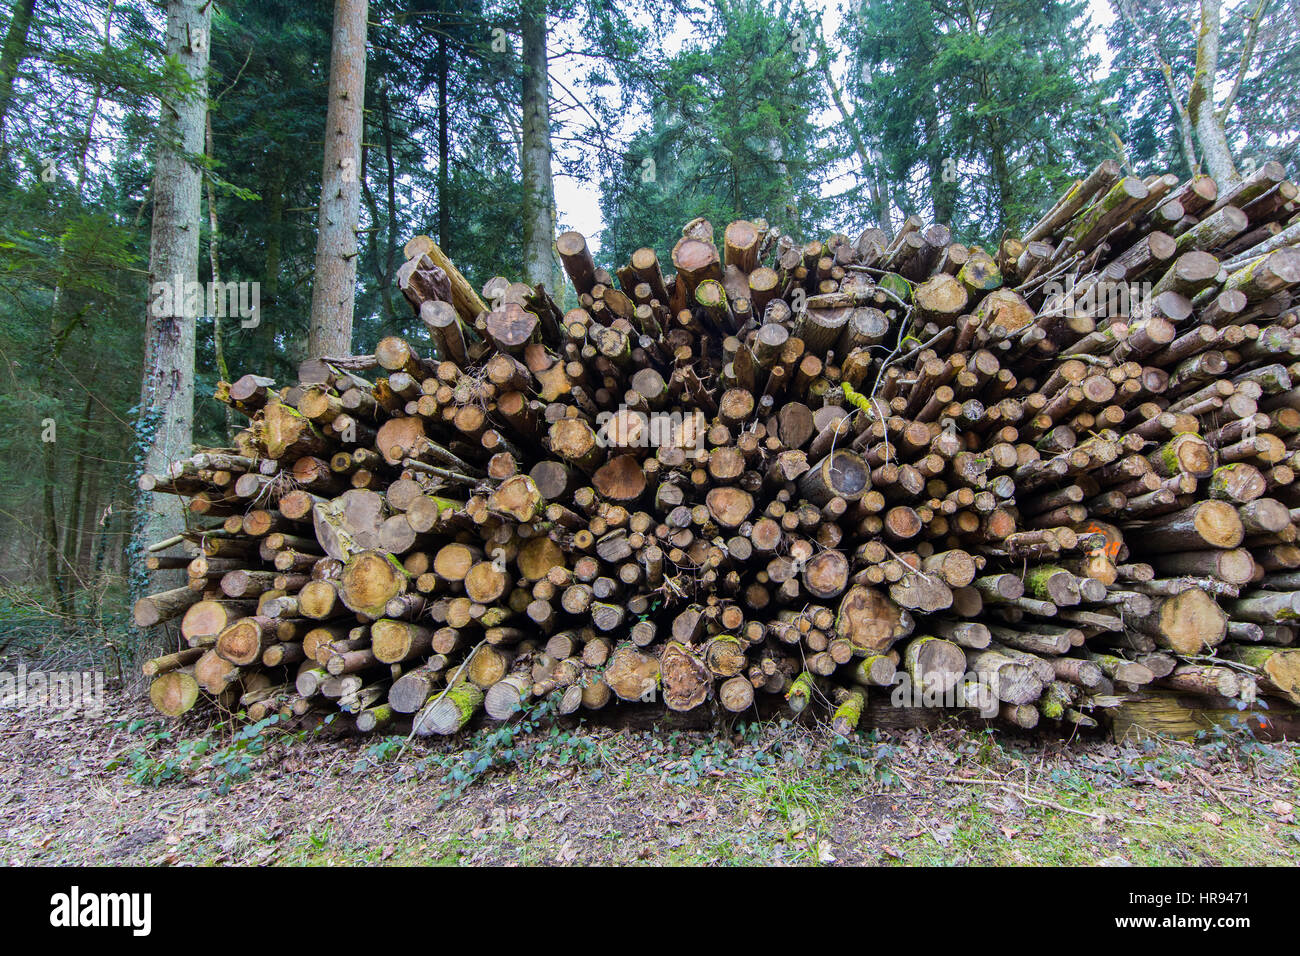 Natural log pile with trunks in the forest Stock Photo